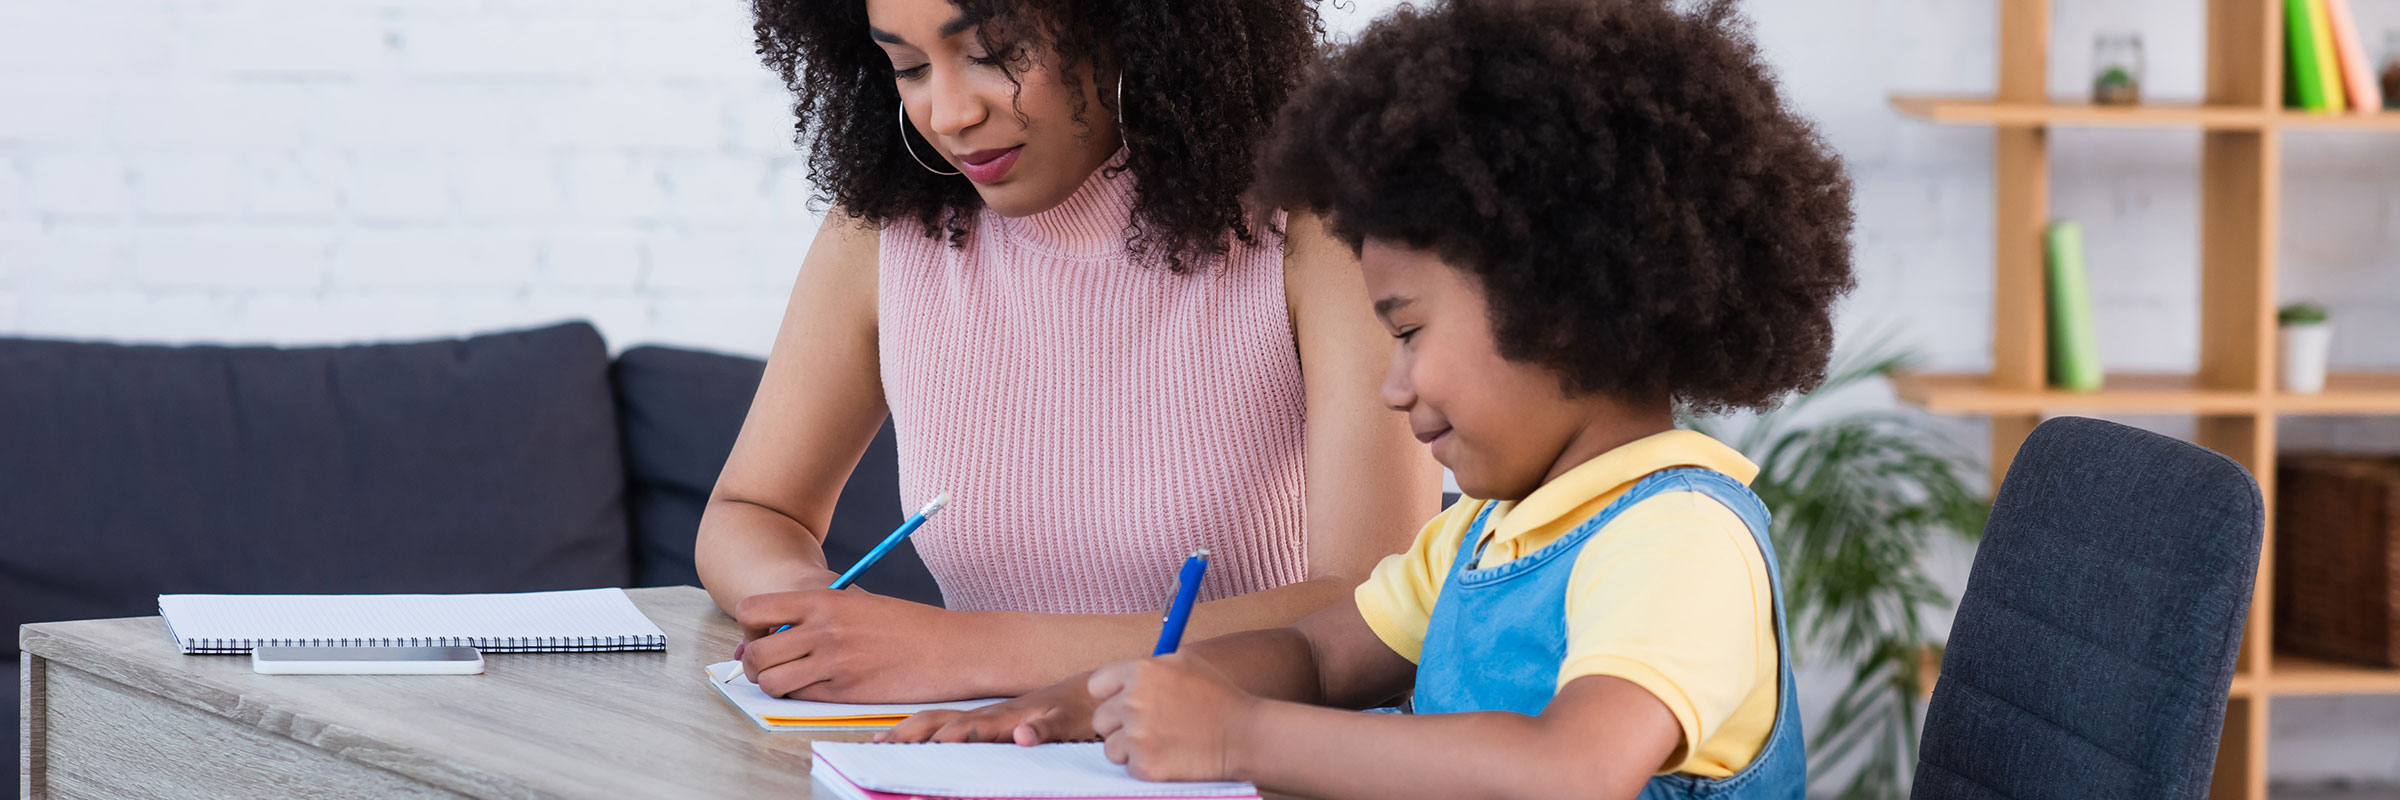 Mother and child sitting at desk working on homework together